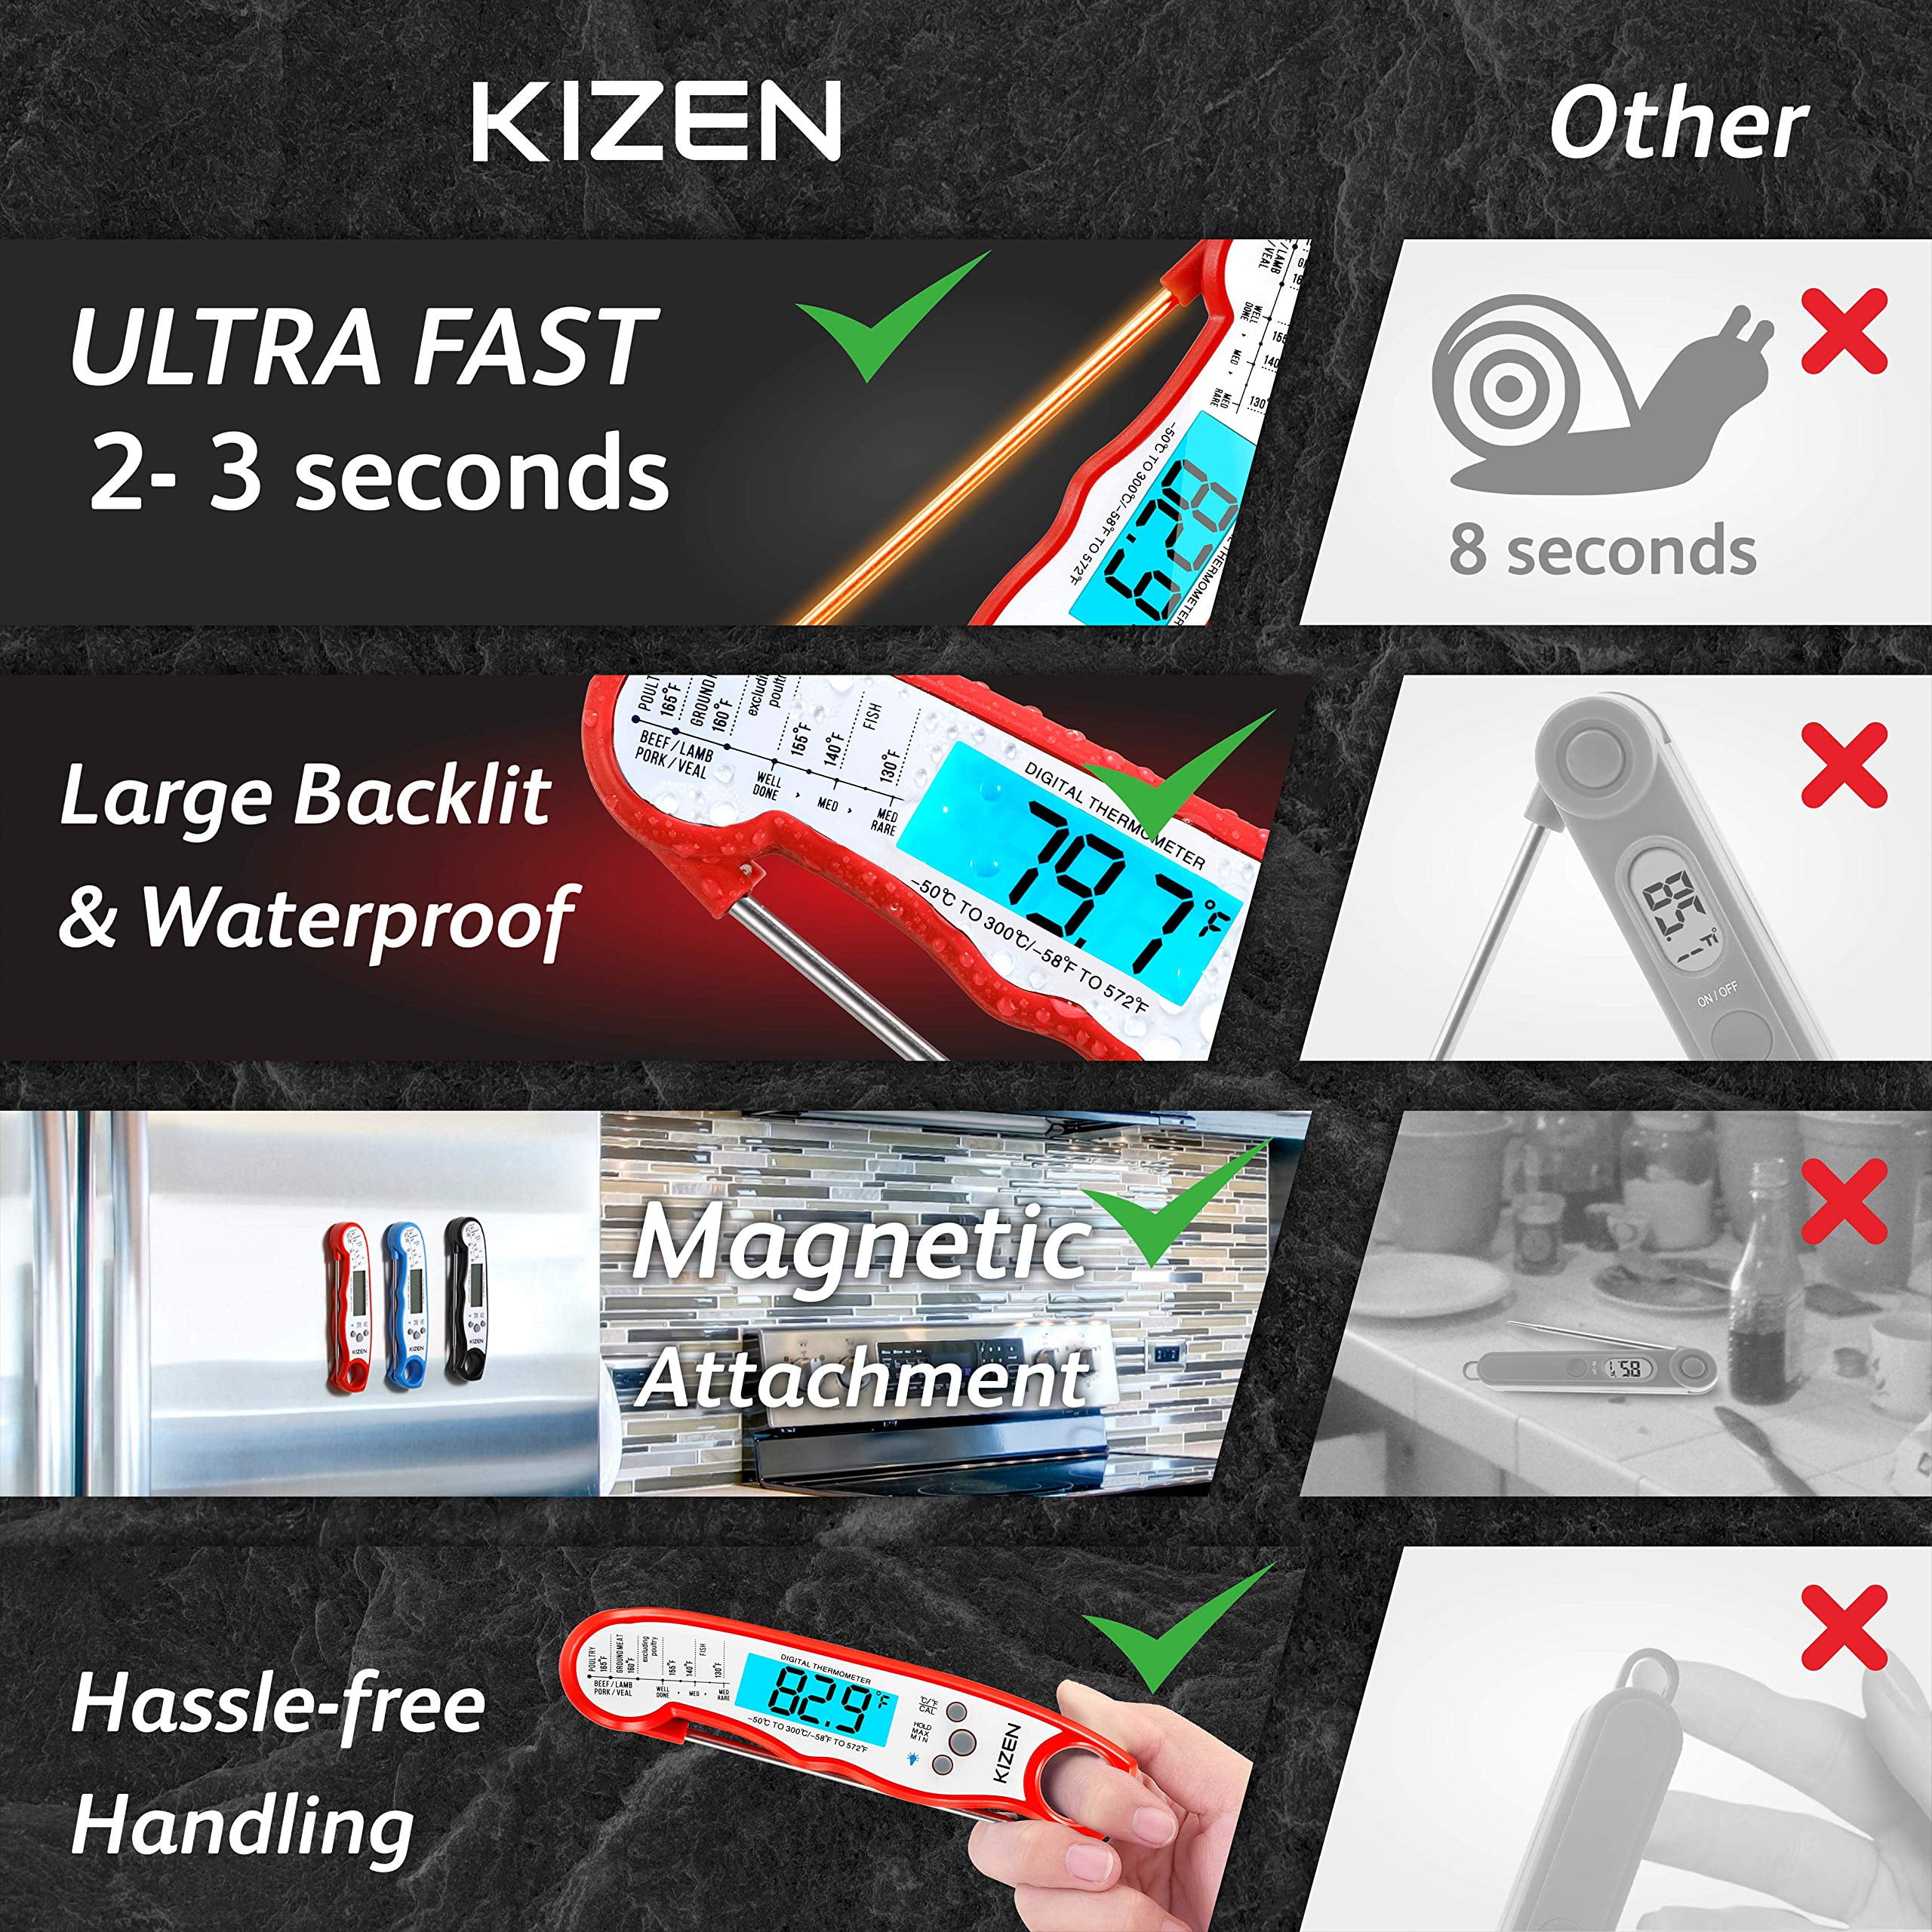 Kizen's digital instant read thermometer is perfect for holiday